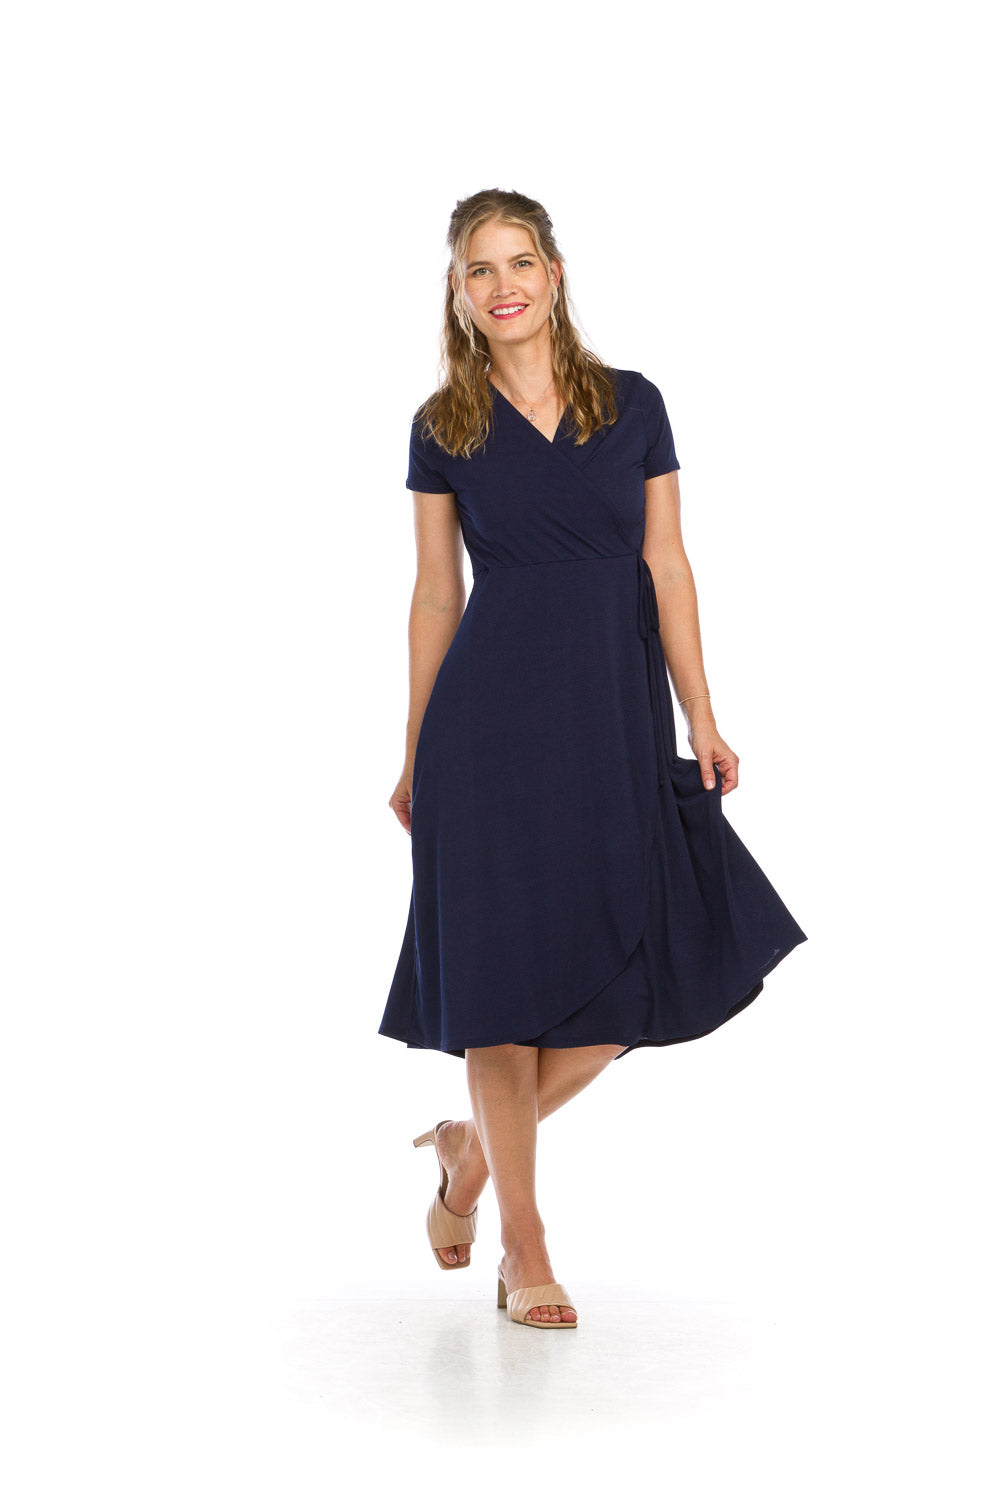 PD16695 NAVY Crepe Stretch Wrap Look Dress